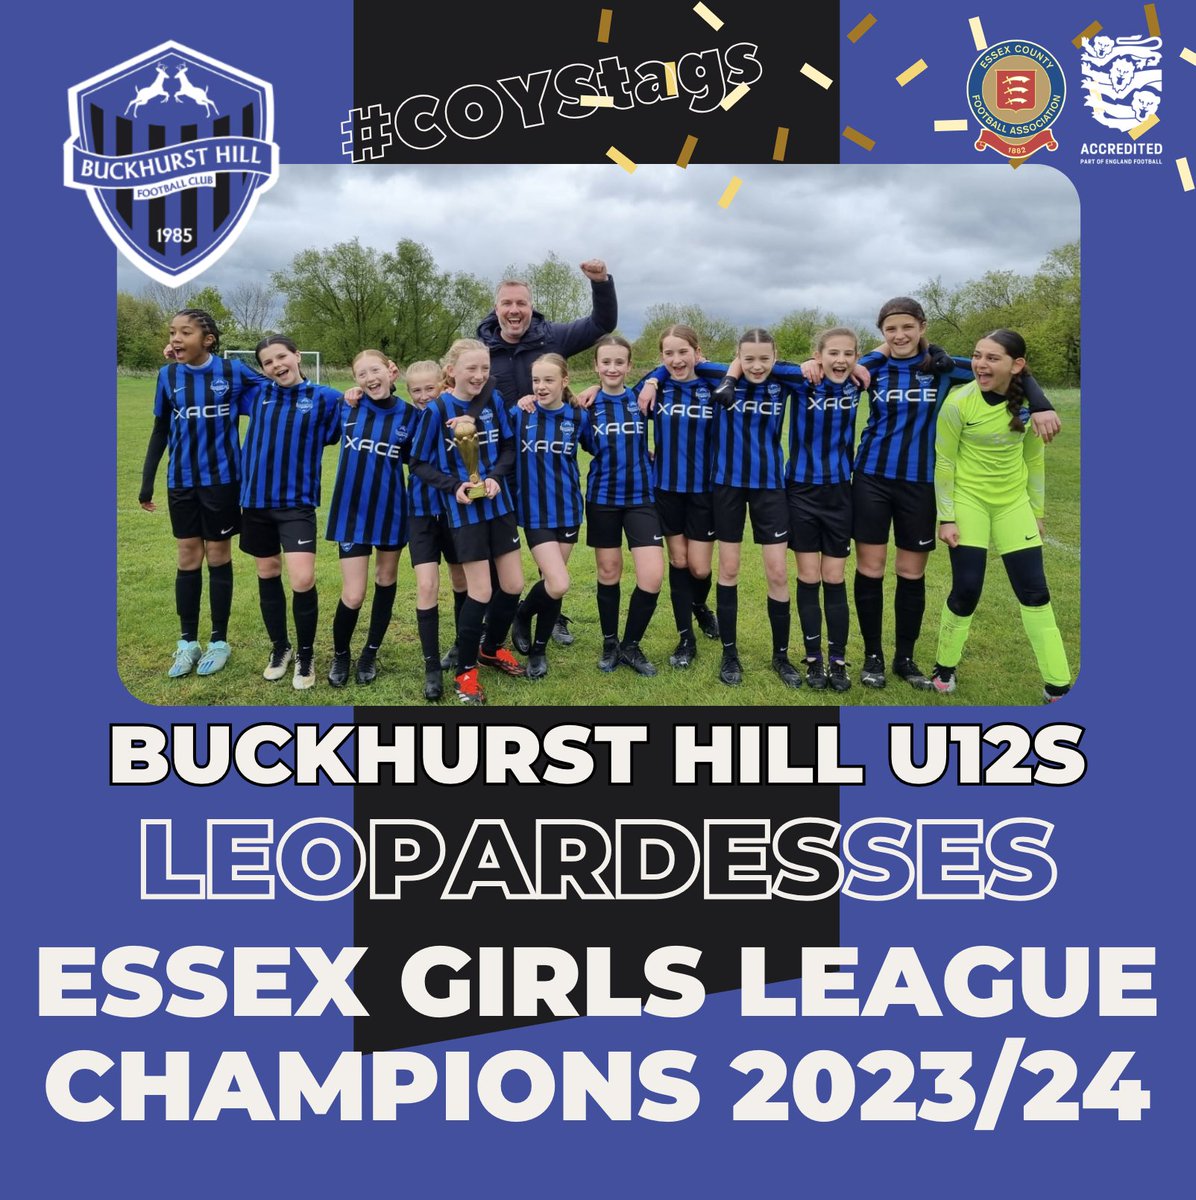 🚨CHAMPIONS! ⚫ 🔵 ⚽ 🏆 Congratulations to our Buckhurst Hill Under 12 Leopardesses for clinching the League Title in the Essex Girls League! 🏆⚽️ #Champions #EssexGirlsLeague #BuckhurstHill